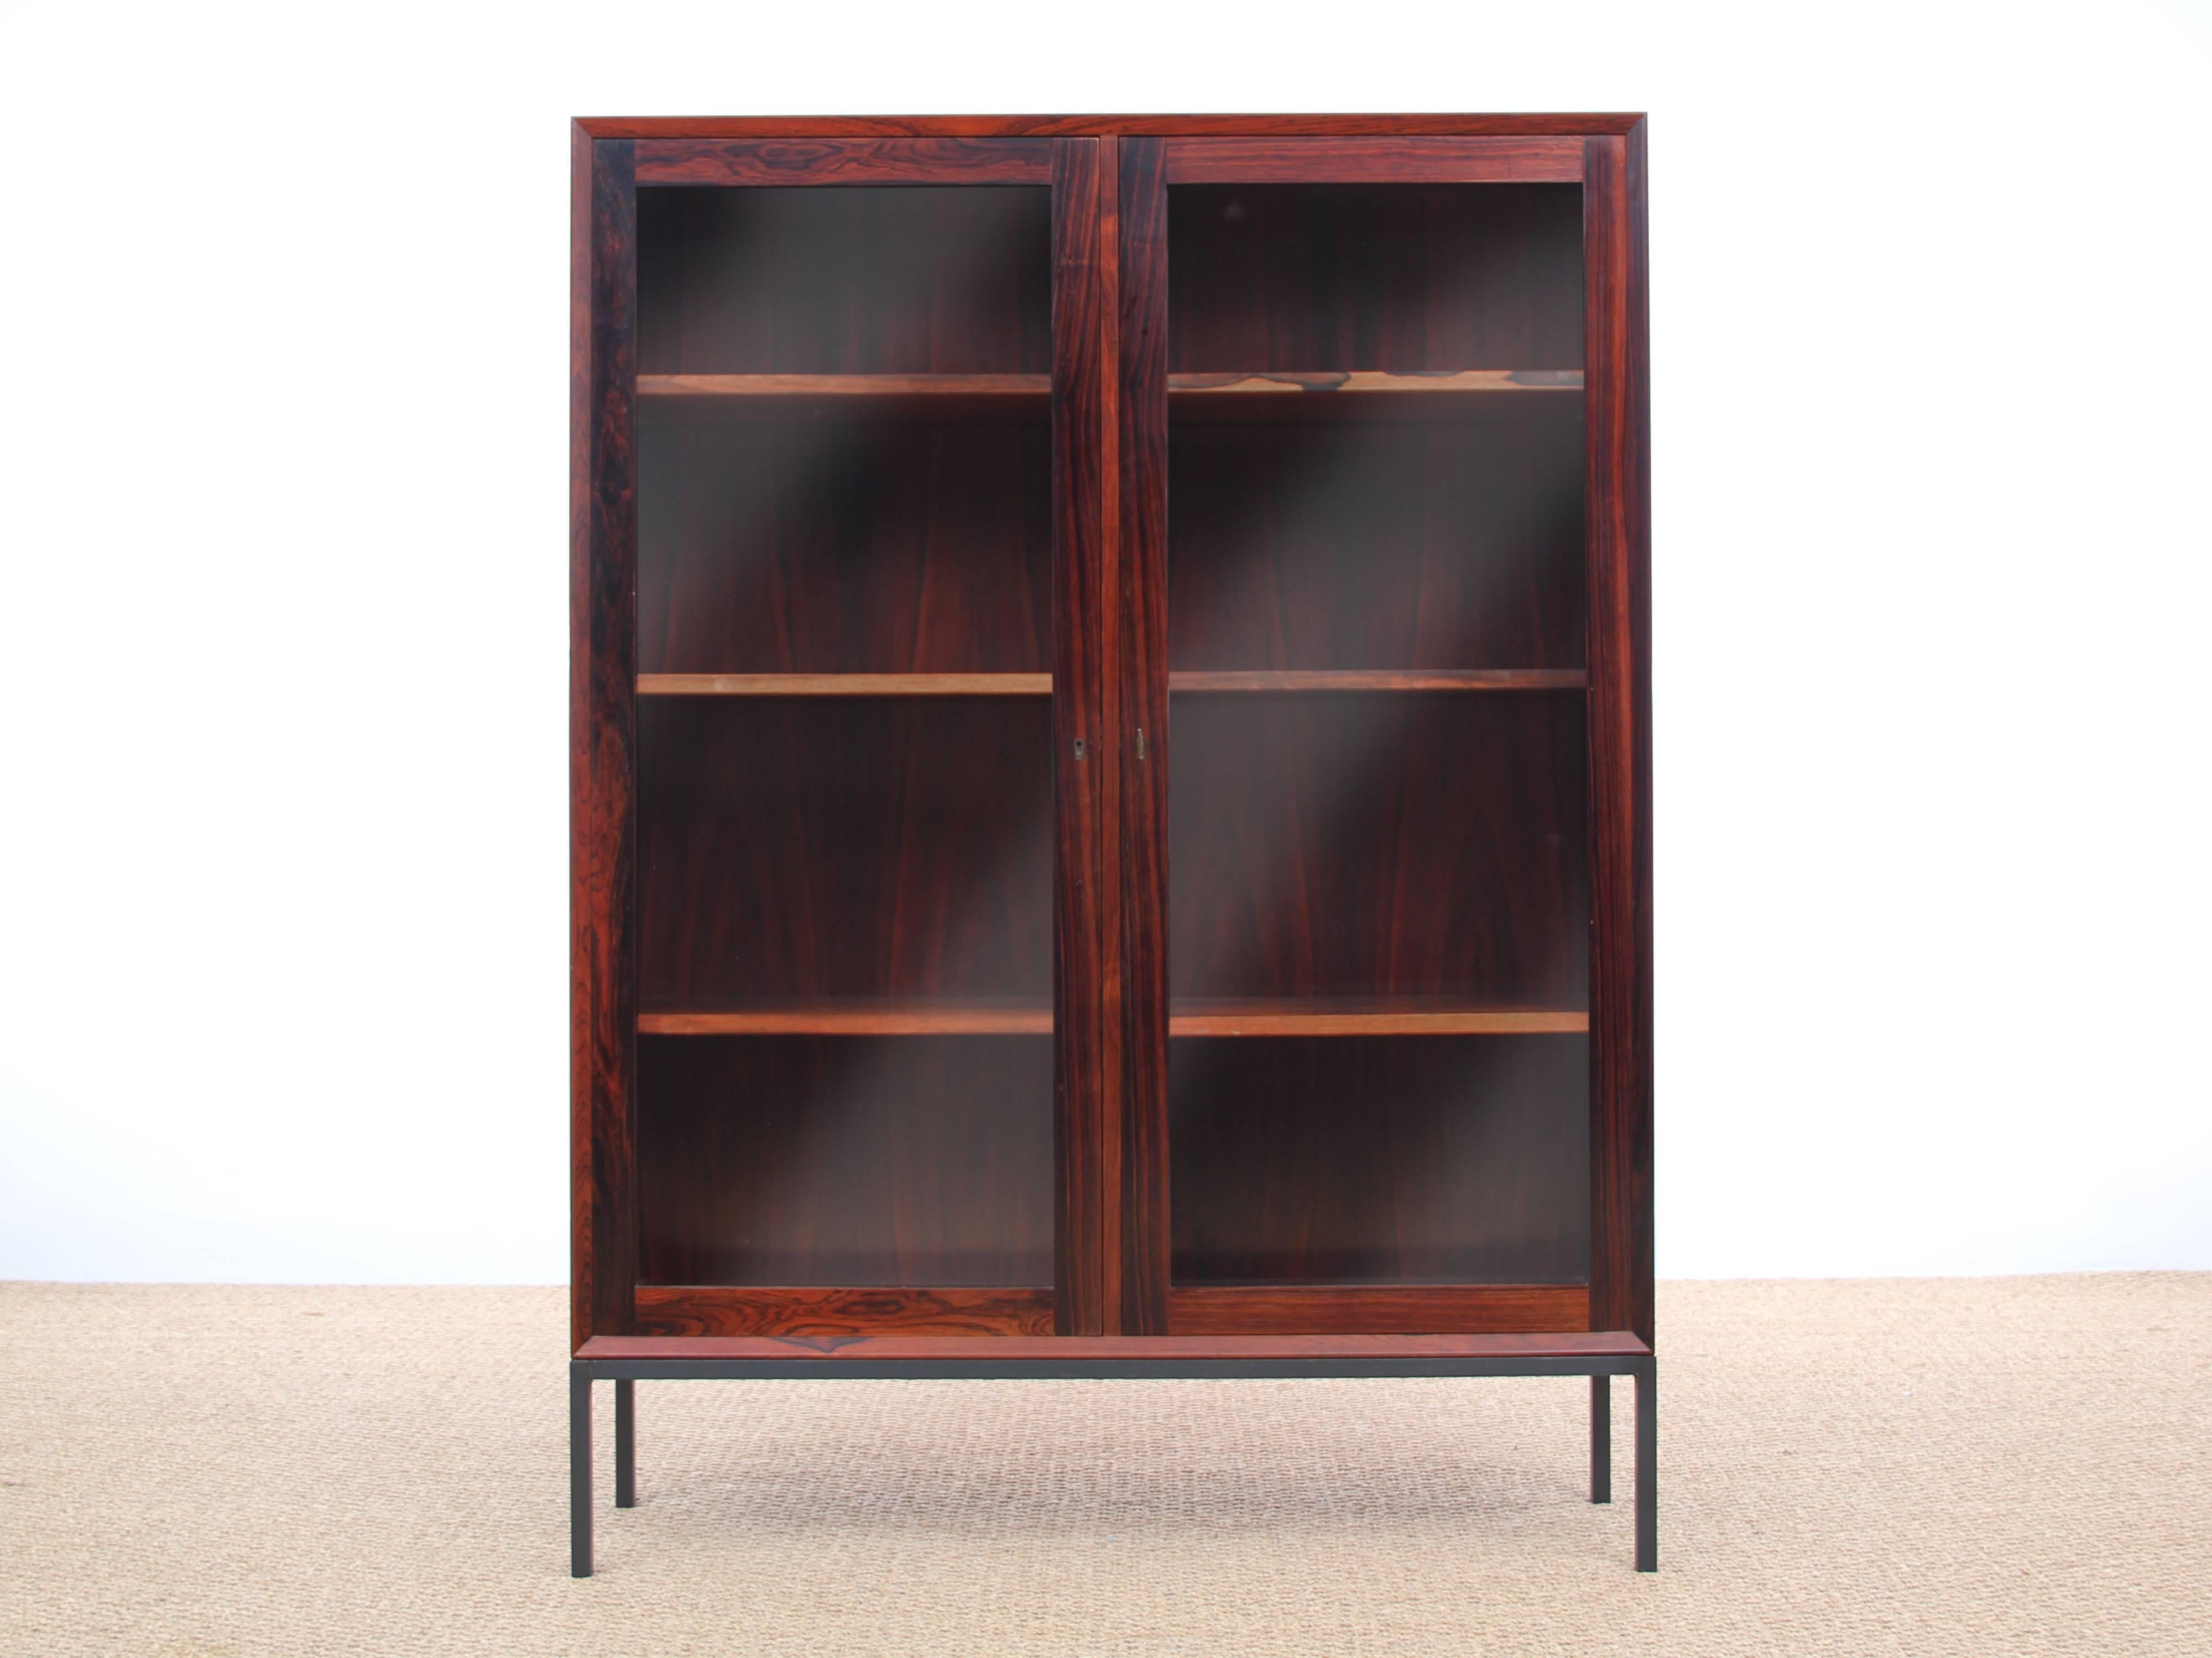 Danish work. Scandinavian showcase rosewood. Steel base. Adjustable shelves. Bevelled edges. Two rooms available. Price indicated for one showcase.